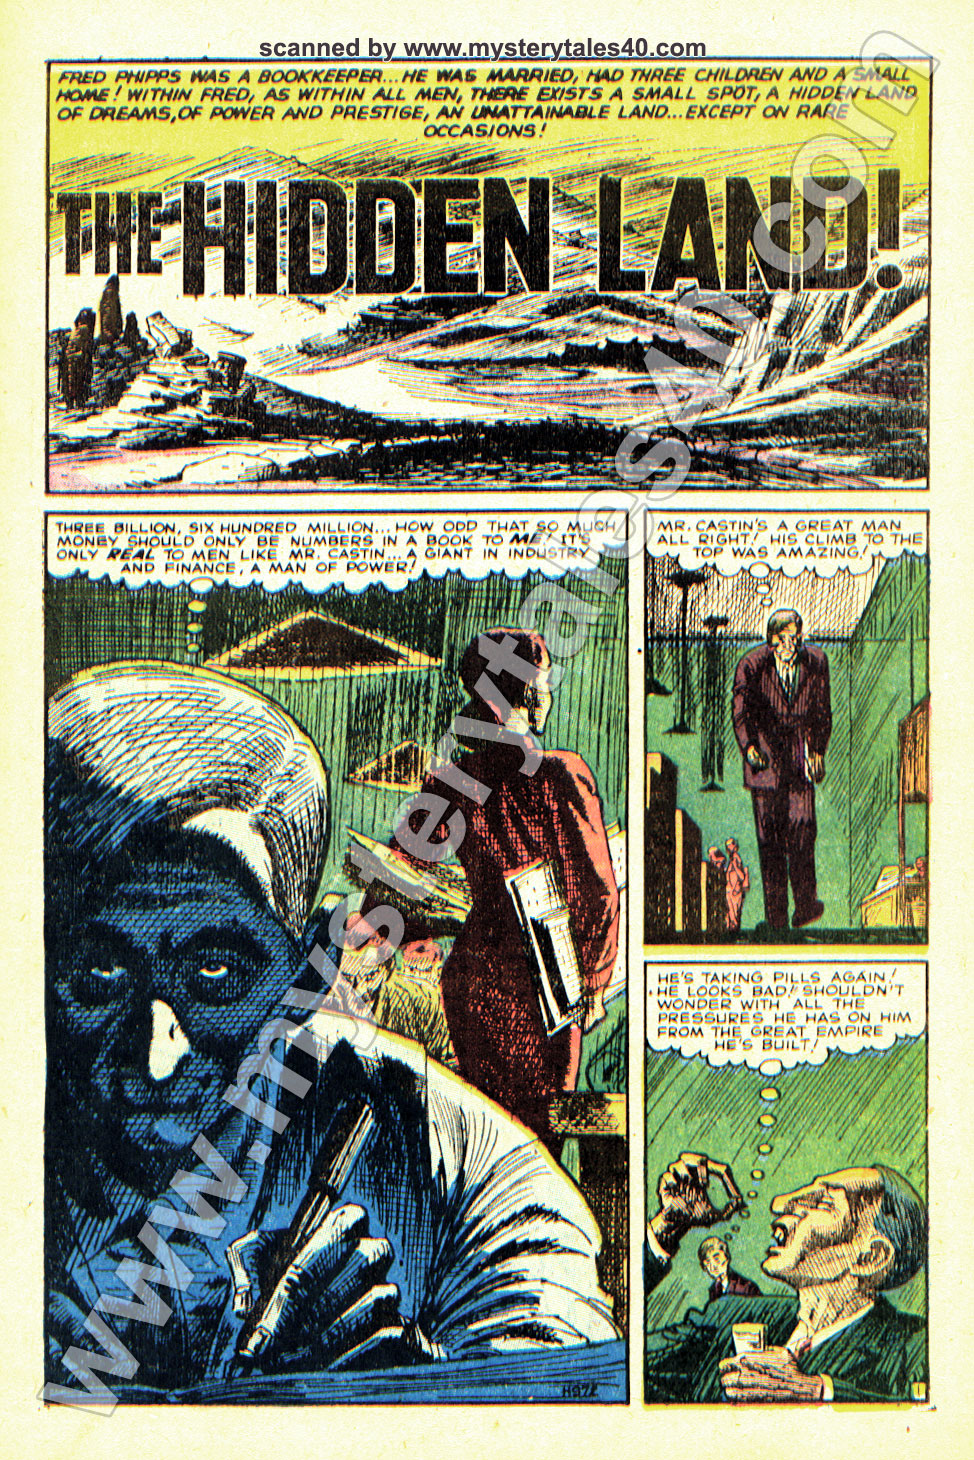 Read online Mystery Tales comic -  Issue #40 - 2